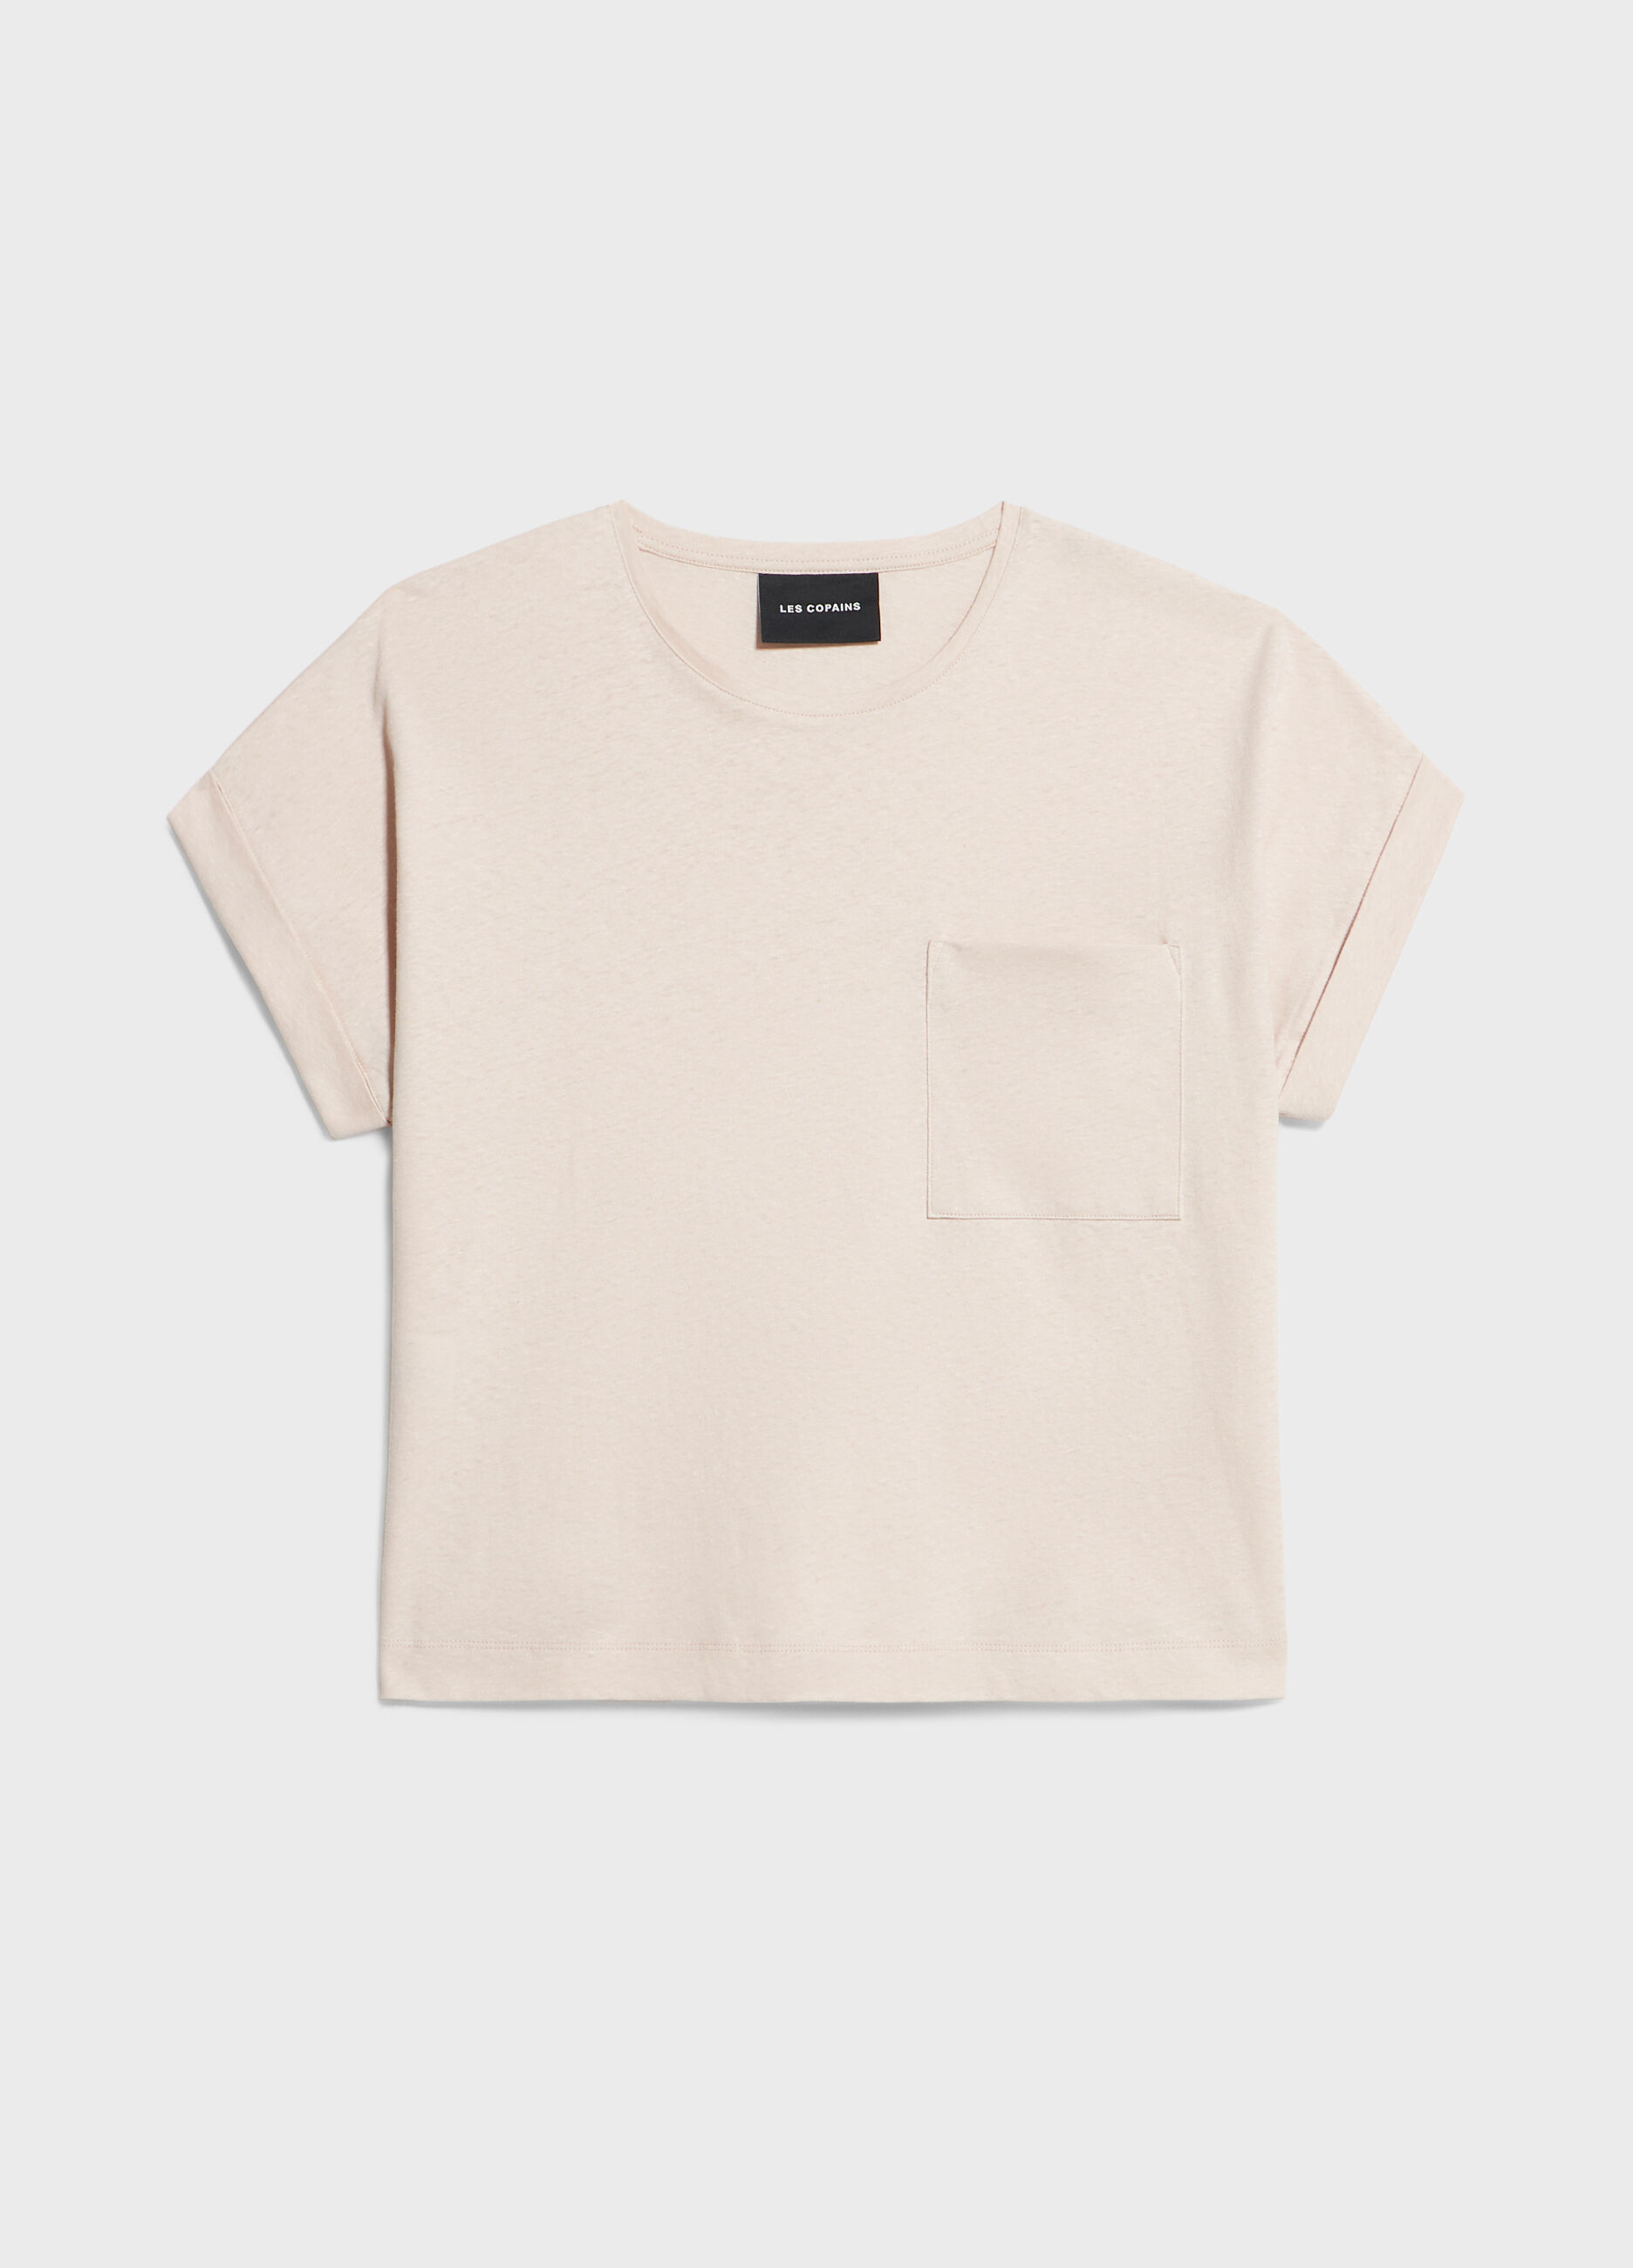 T-shirt in linen and cotton_4